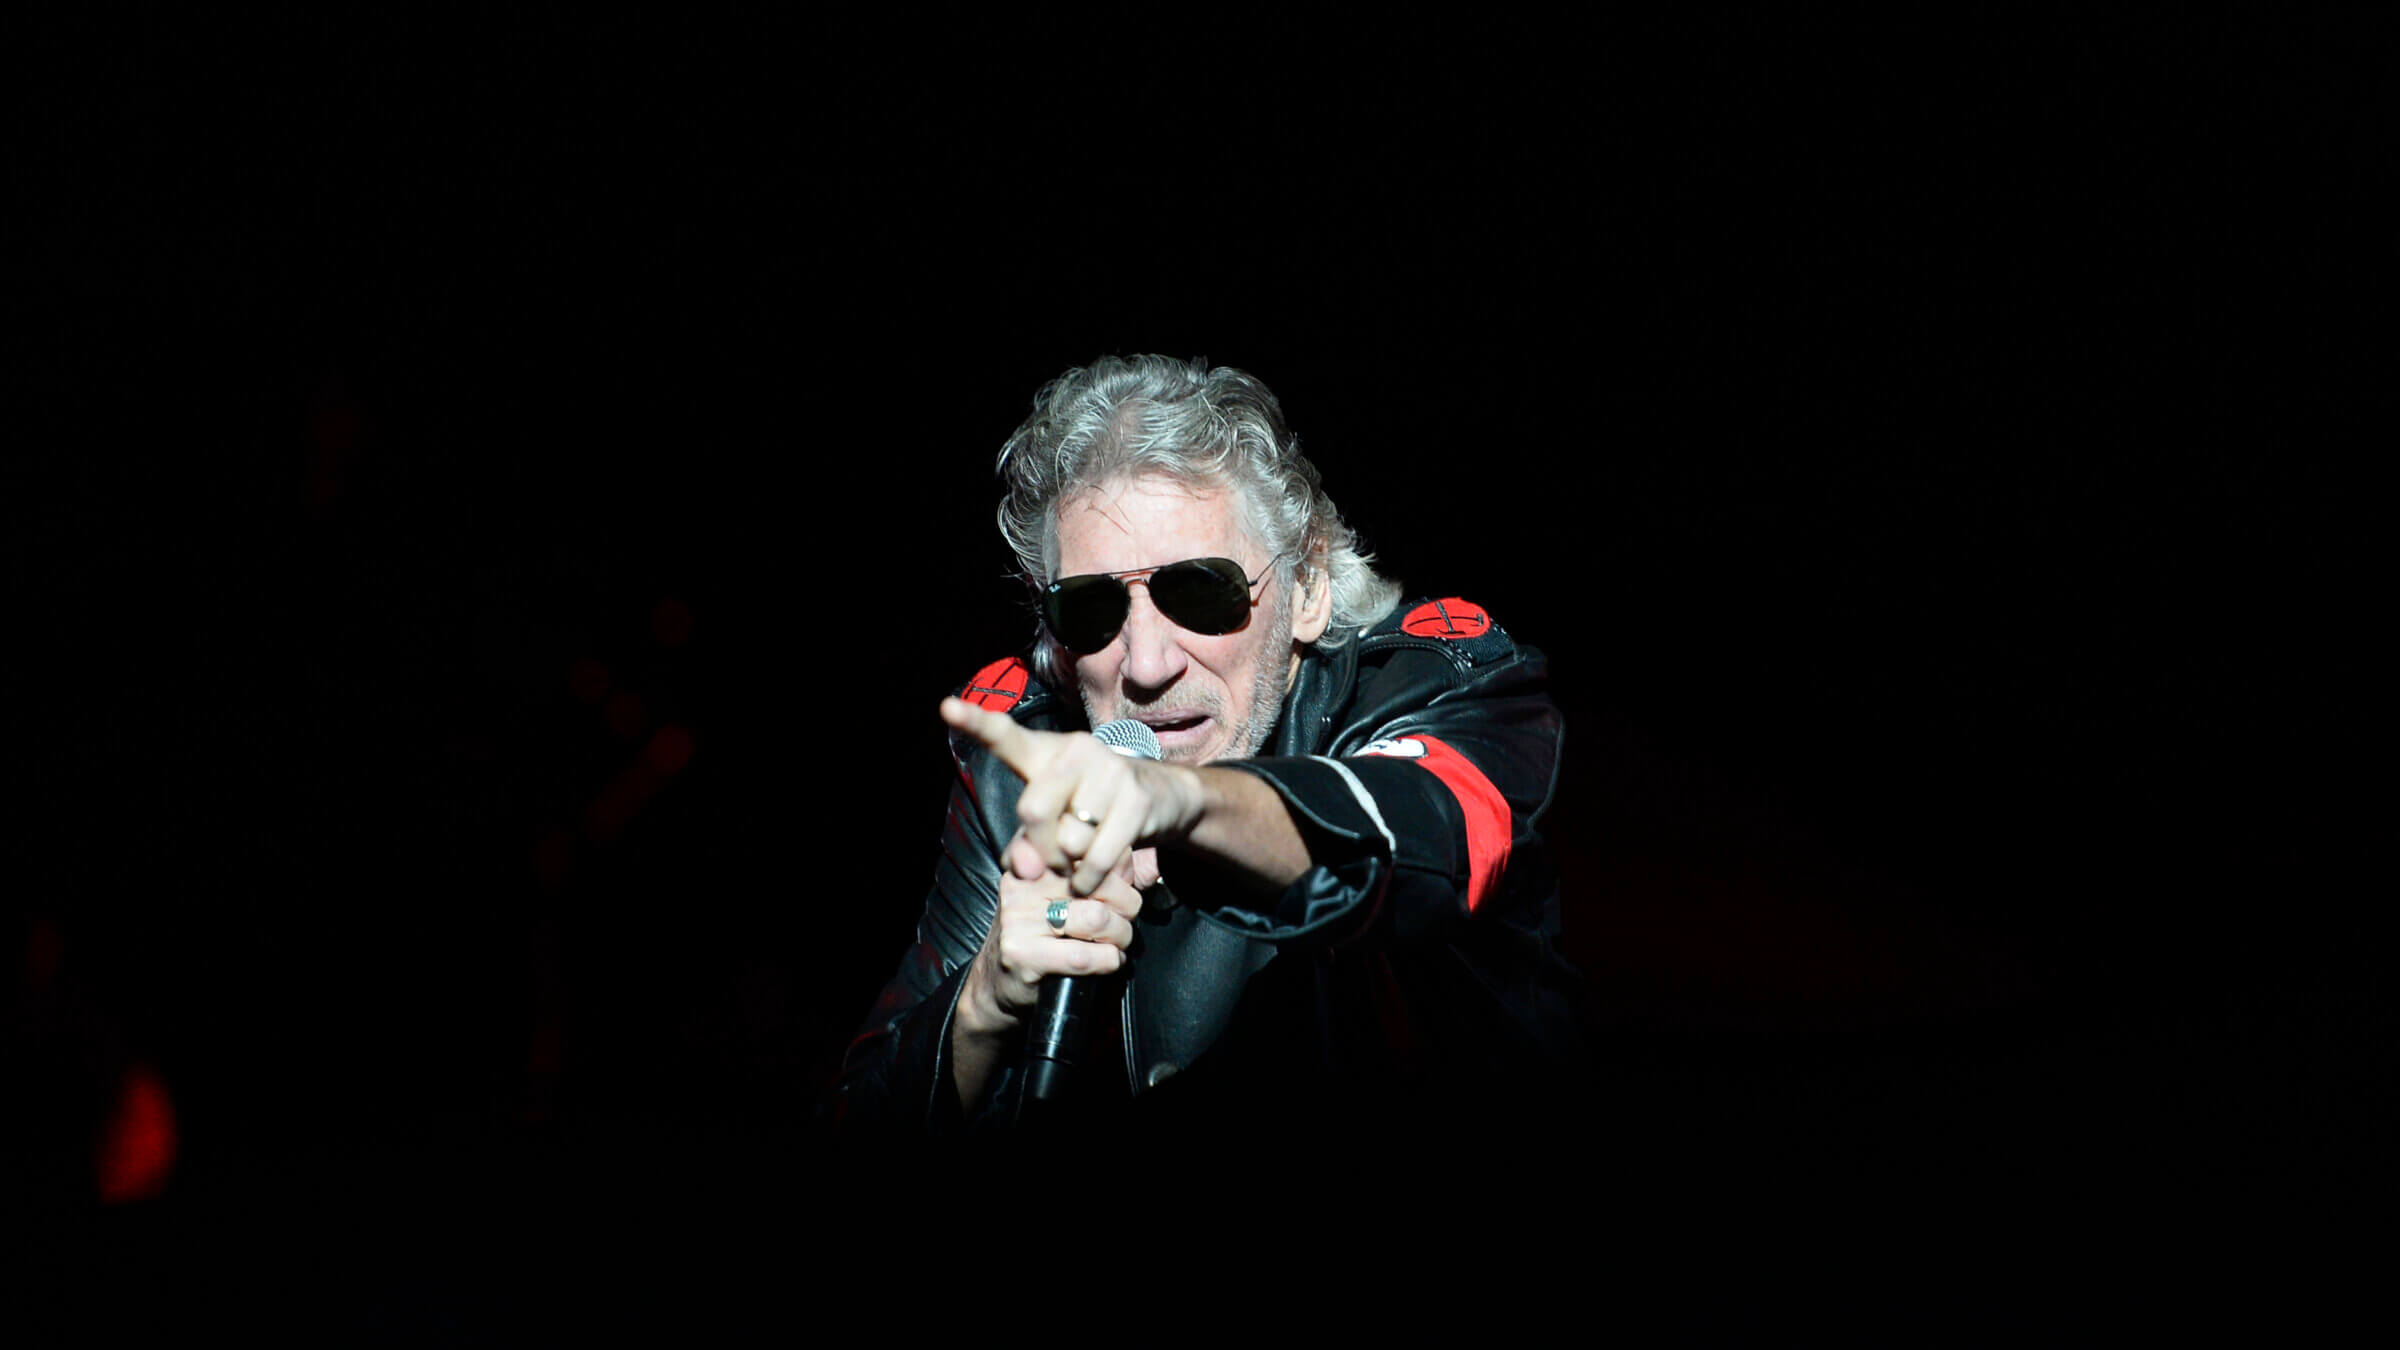 Pink Floyd founding member Roger Waters onstage in Berlin in 2013. He's performed for years in the costume with the red armband resembling a Nazi uniform. 